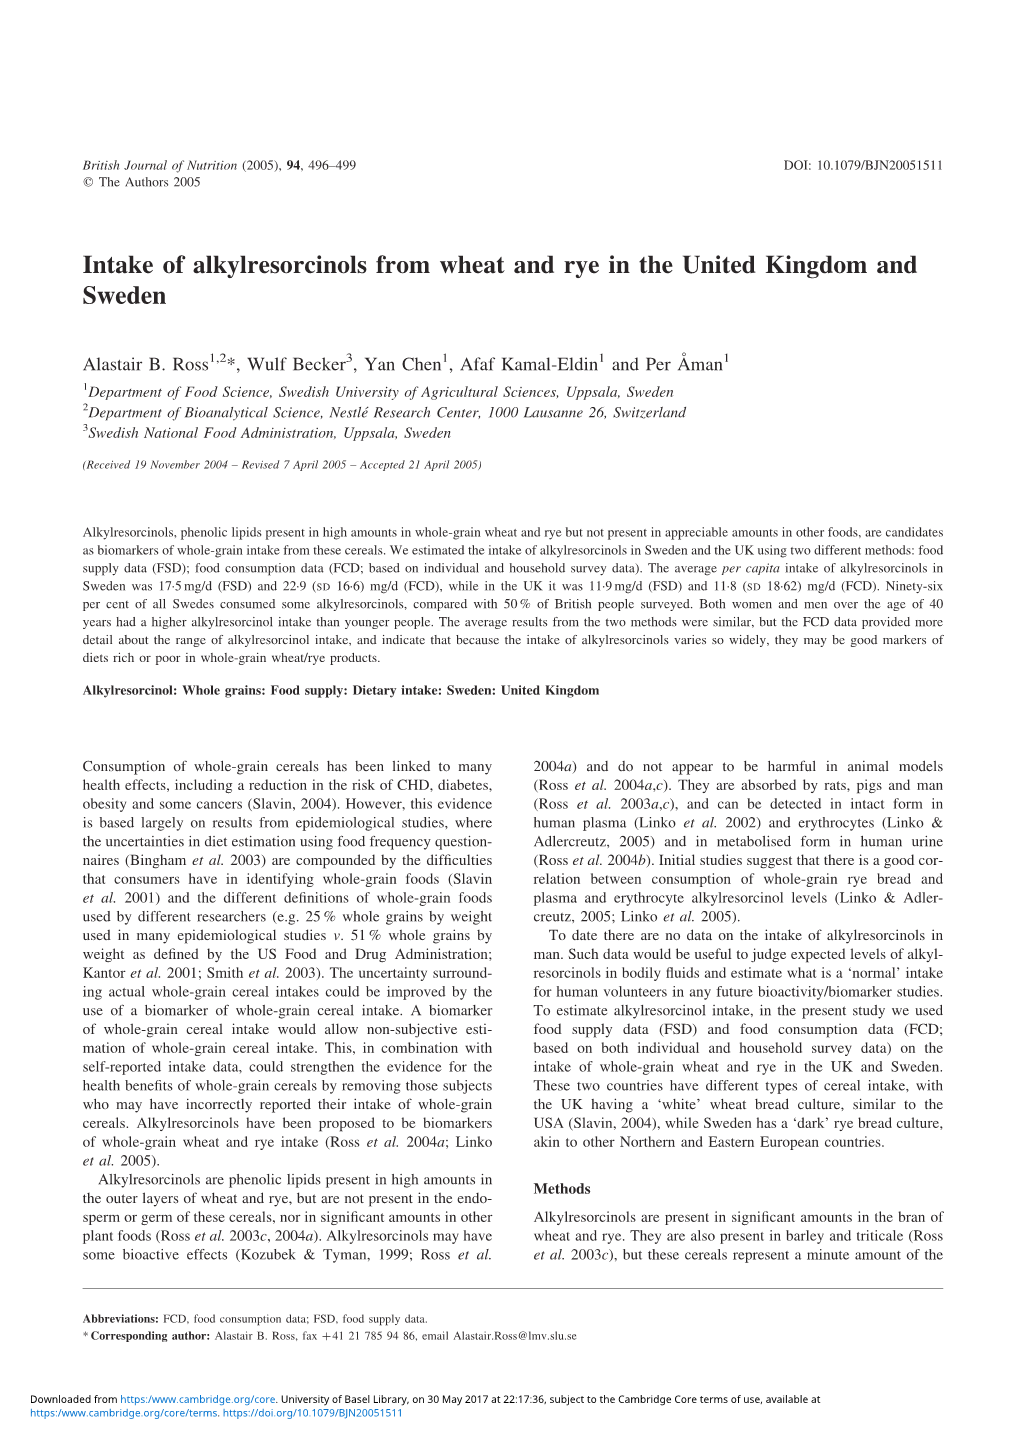 Intake of Alkylresorcinols from Wheat and Rye in the United Kingdom and Sweden